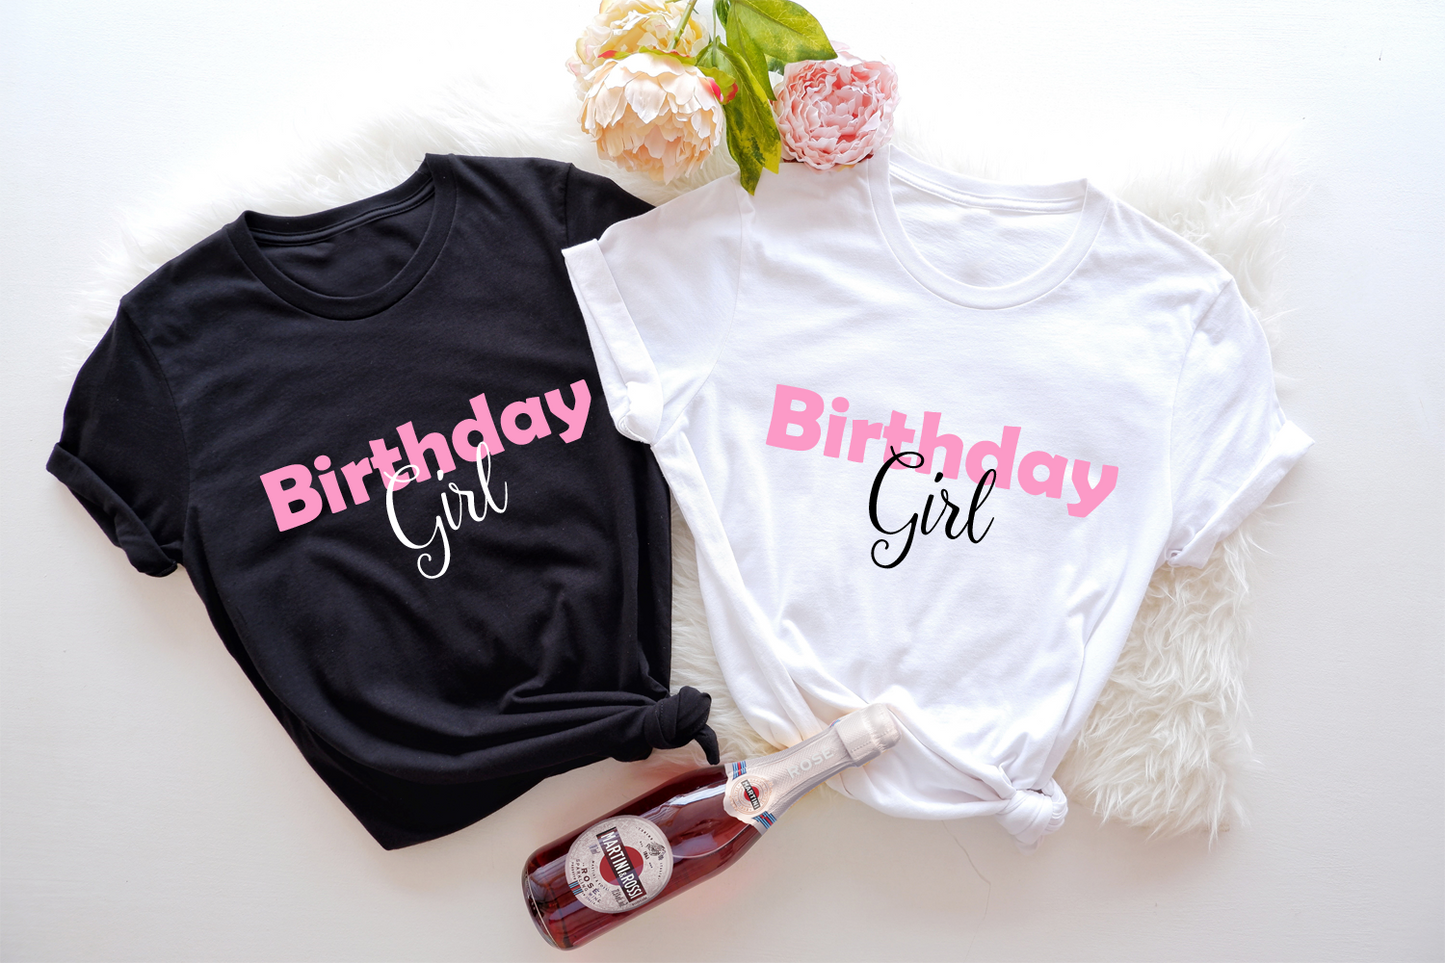 Let everyone know it's her special day with this eye-catching "Birthday Girl" shirt. 